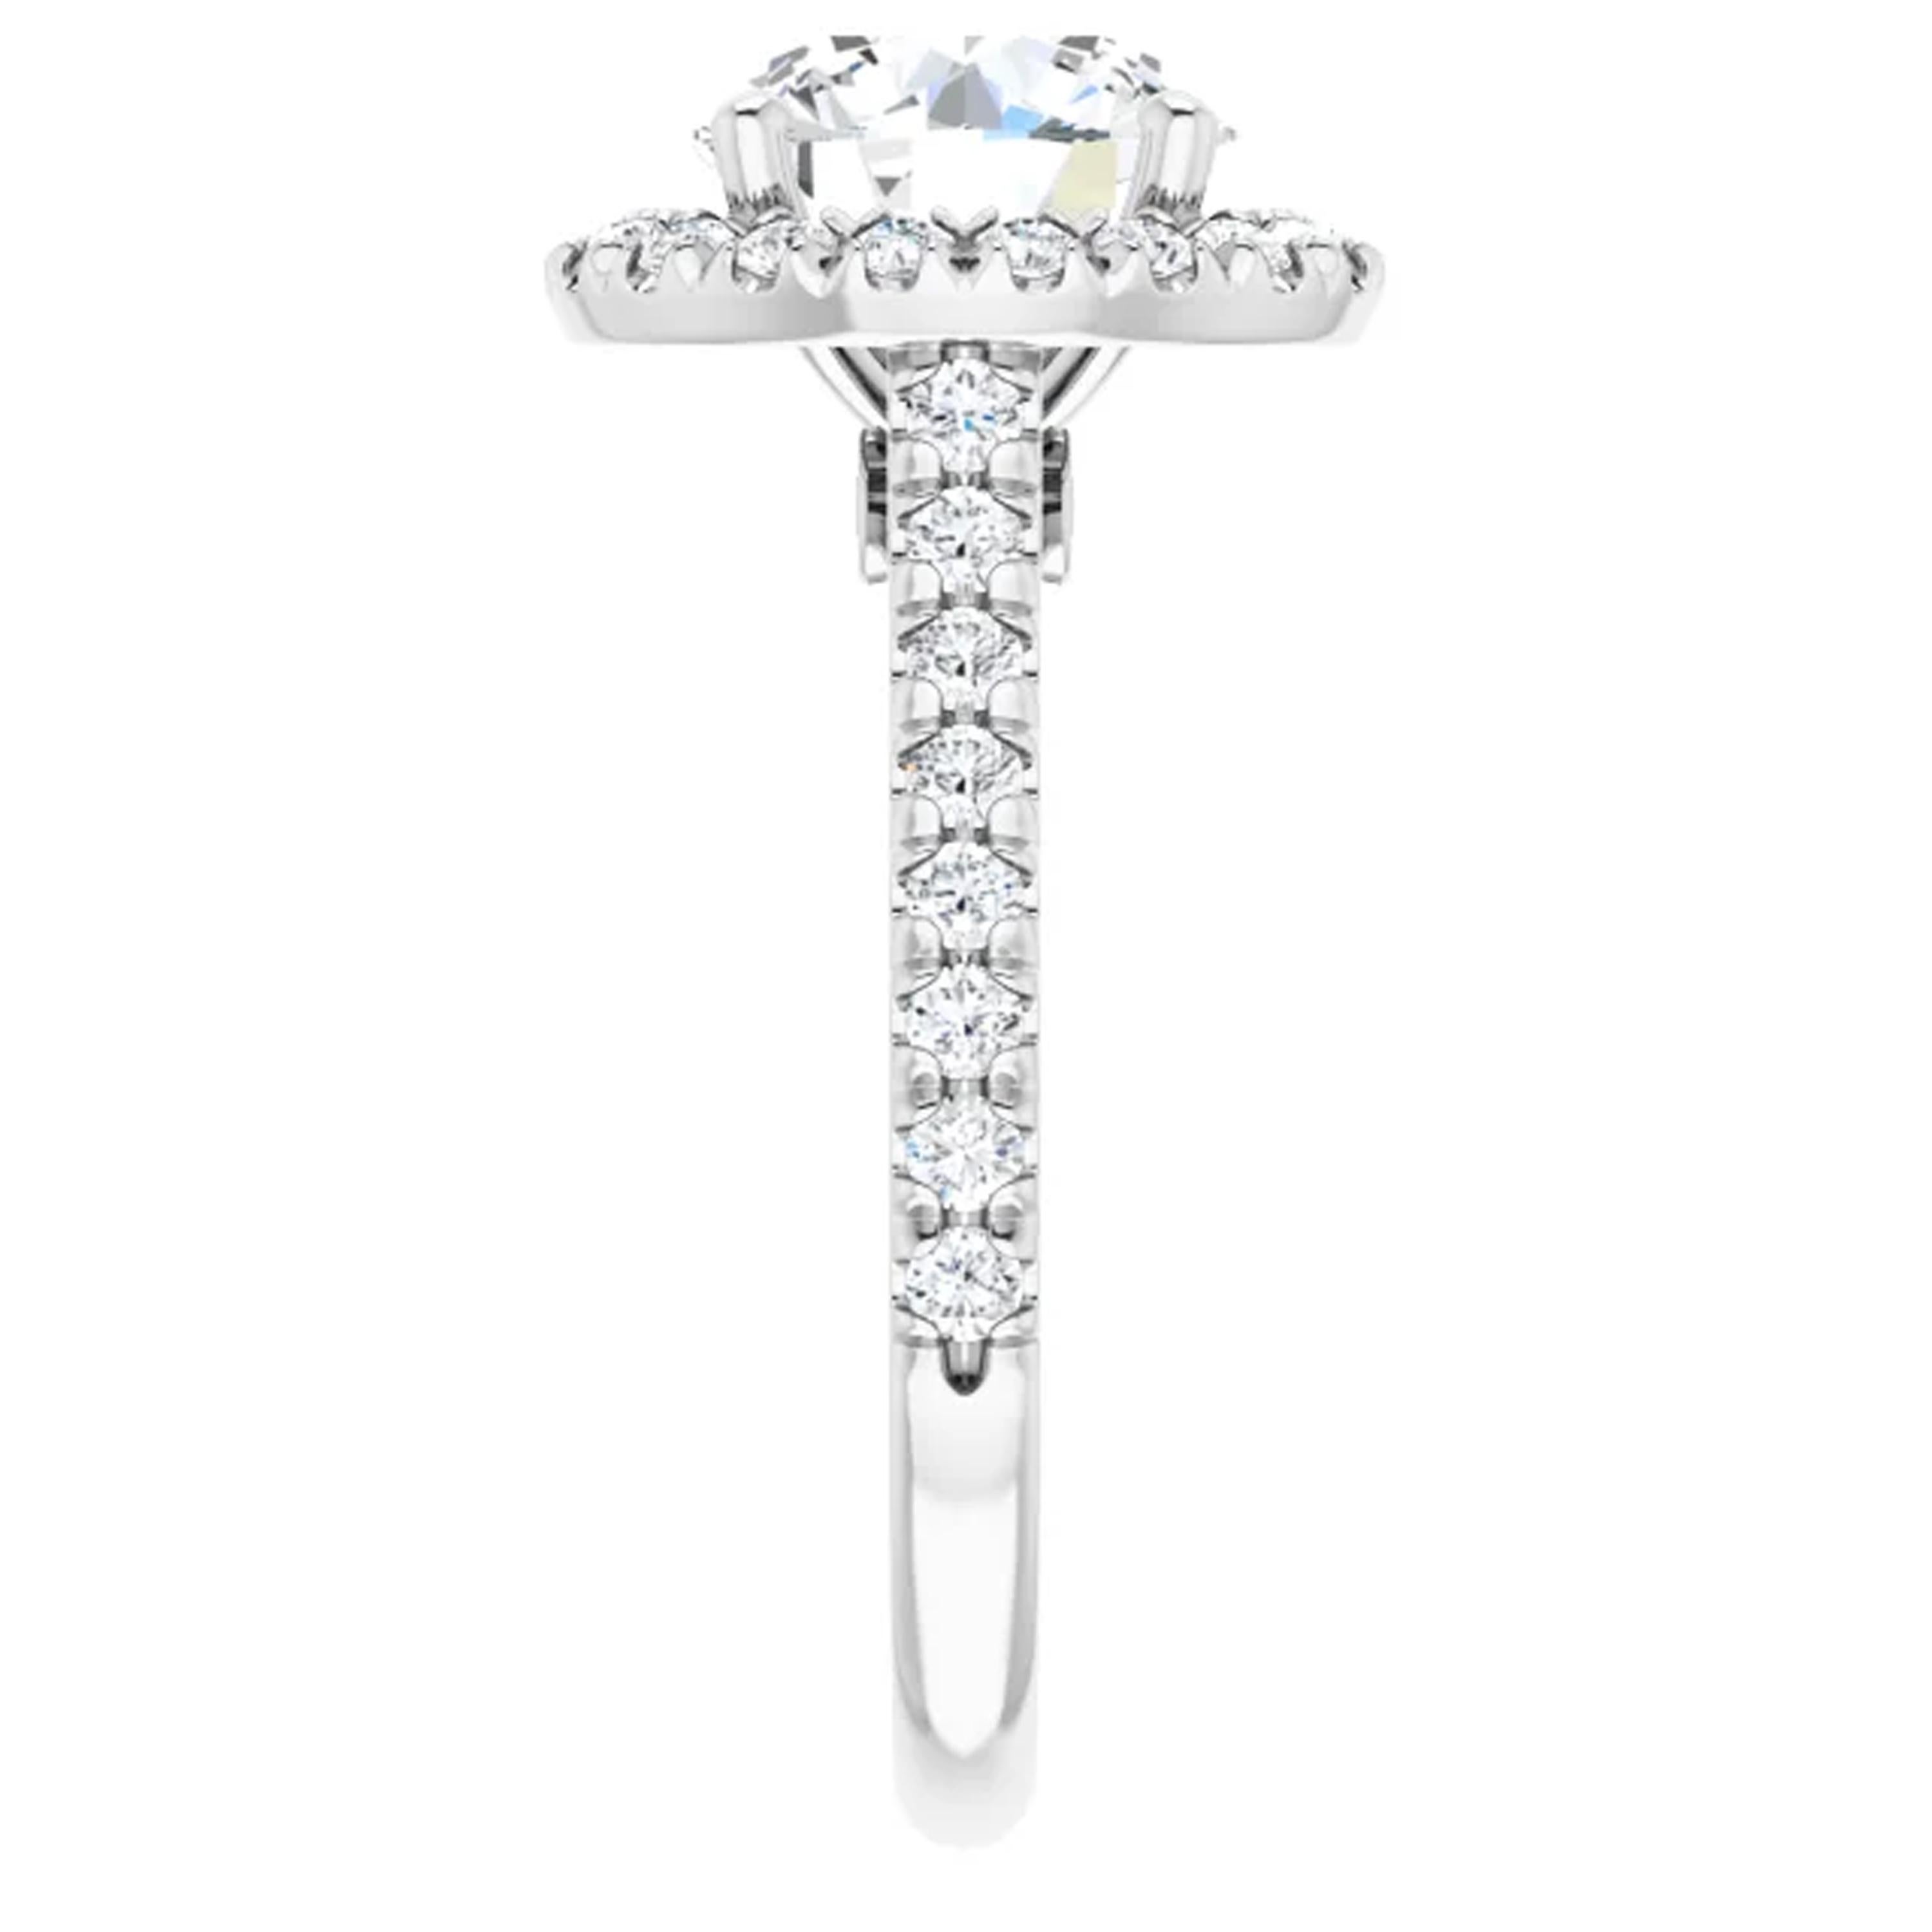 Shimmering french pave diamonds dance along the shank of this Valorenna engagement ring. Additional white lustrous diamonds surround the halo and amplify the center stone. Valorenna's high-polish strikes noticeable brilliance.

Matching band sold